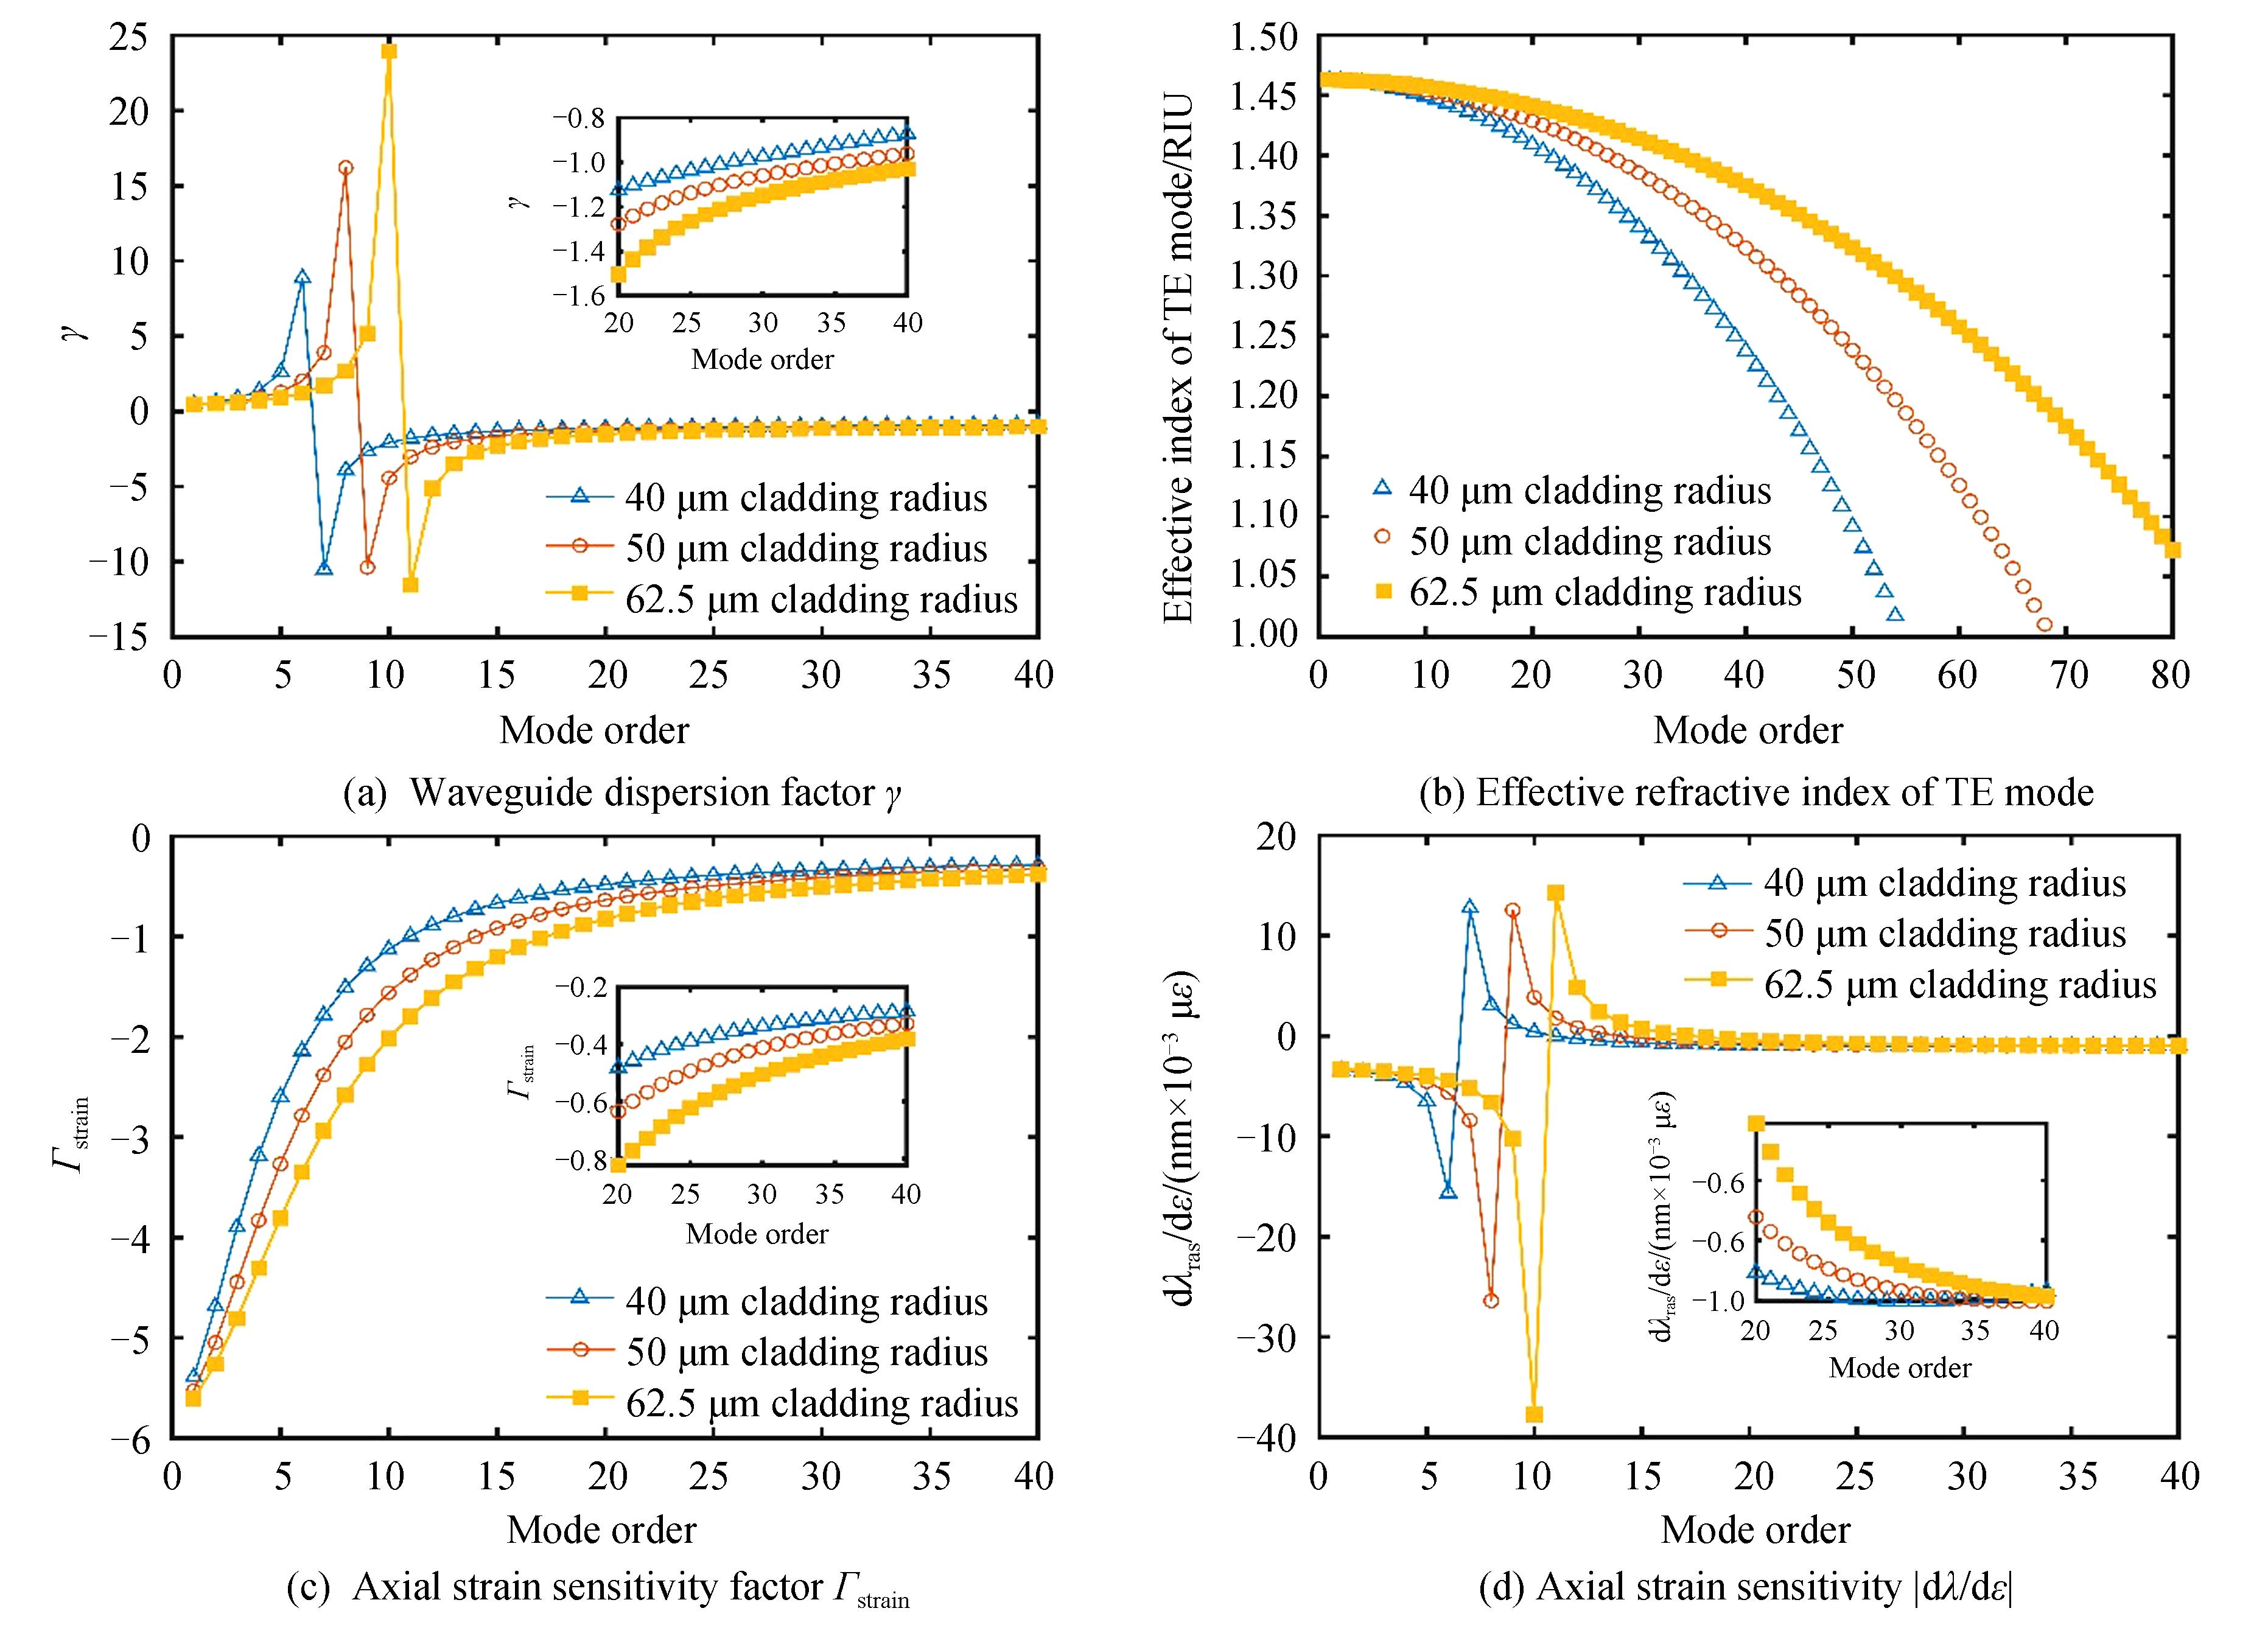 The simulation results of waveguide dispersion factorγ, effective refractive index of TE mode, axial strain sensitivity factorΓstrain, axial strain sensitivity dλ/dε of the first 40 order cladding modes for different cladding radius (40 μm, 50 μm and 62.5 μm)